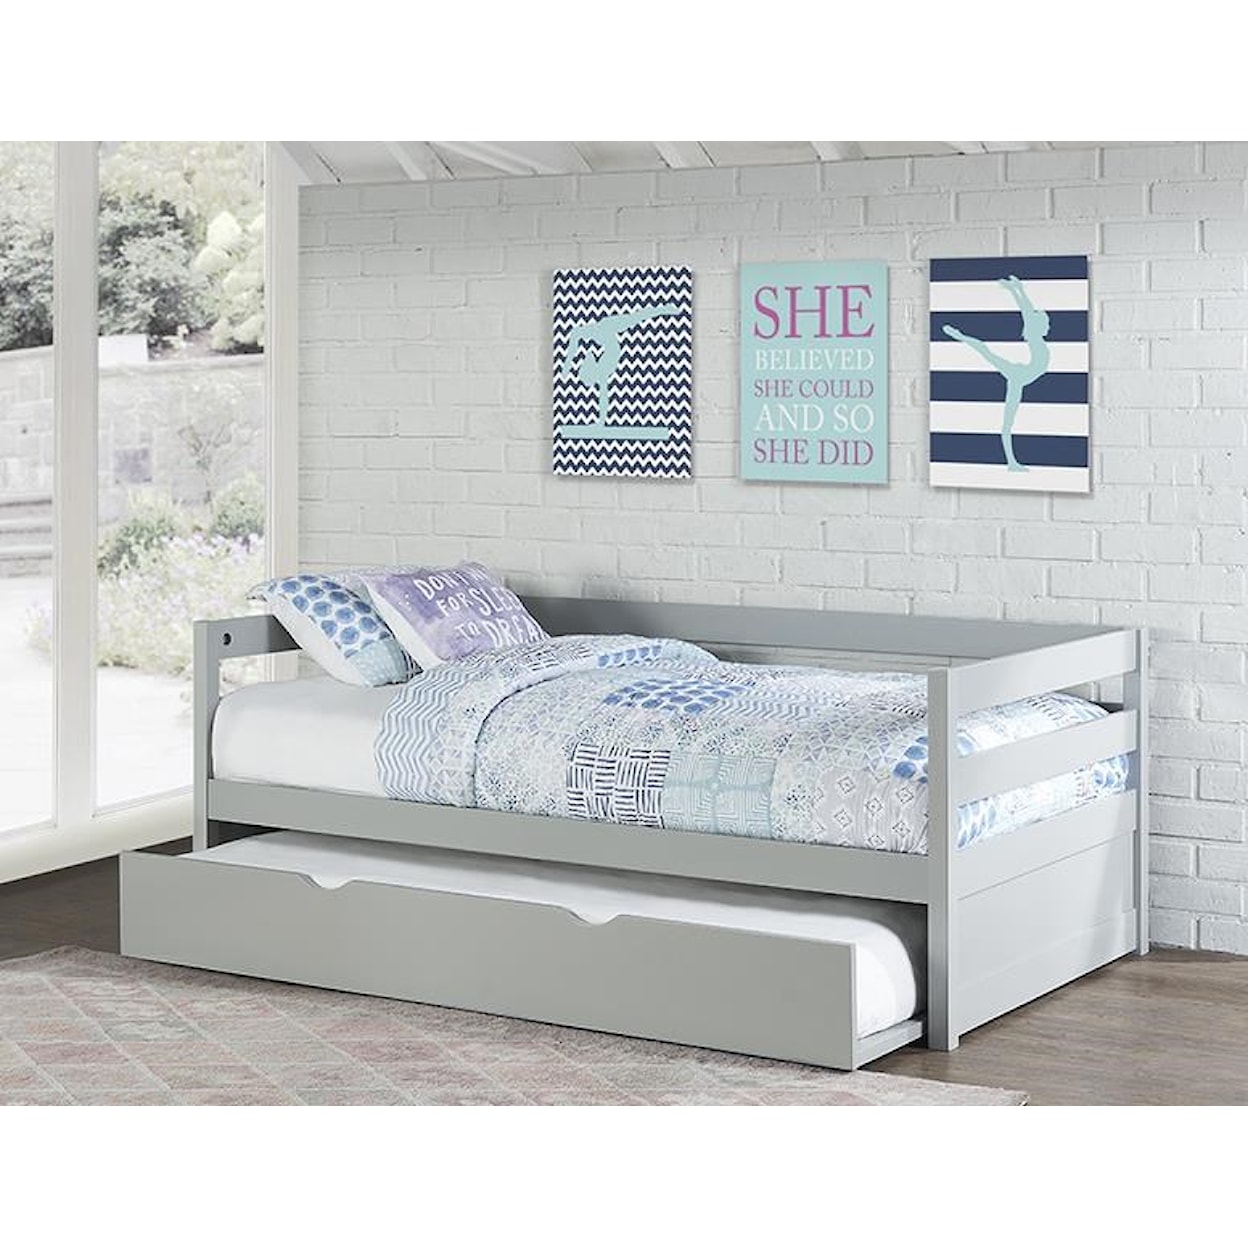 Hillsdale Caspian Gray Daybed with Trundle